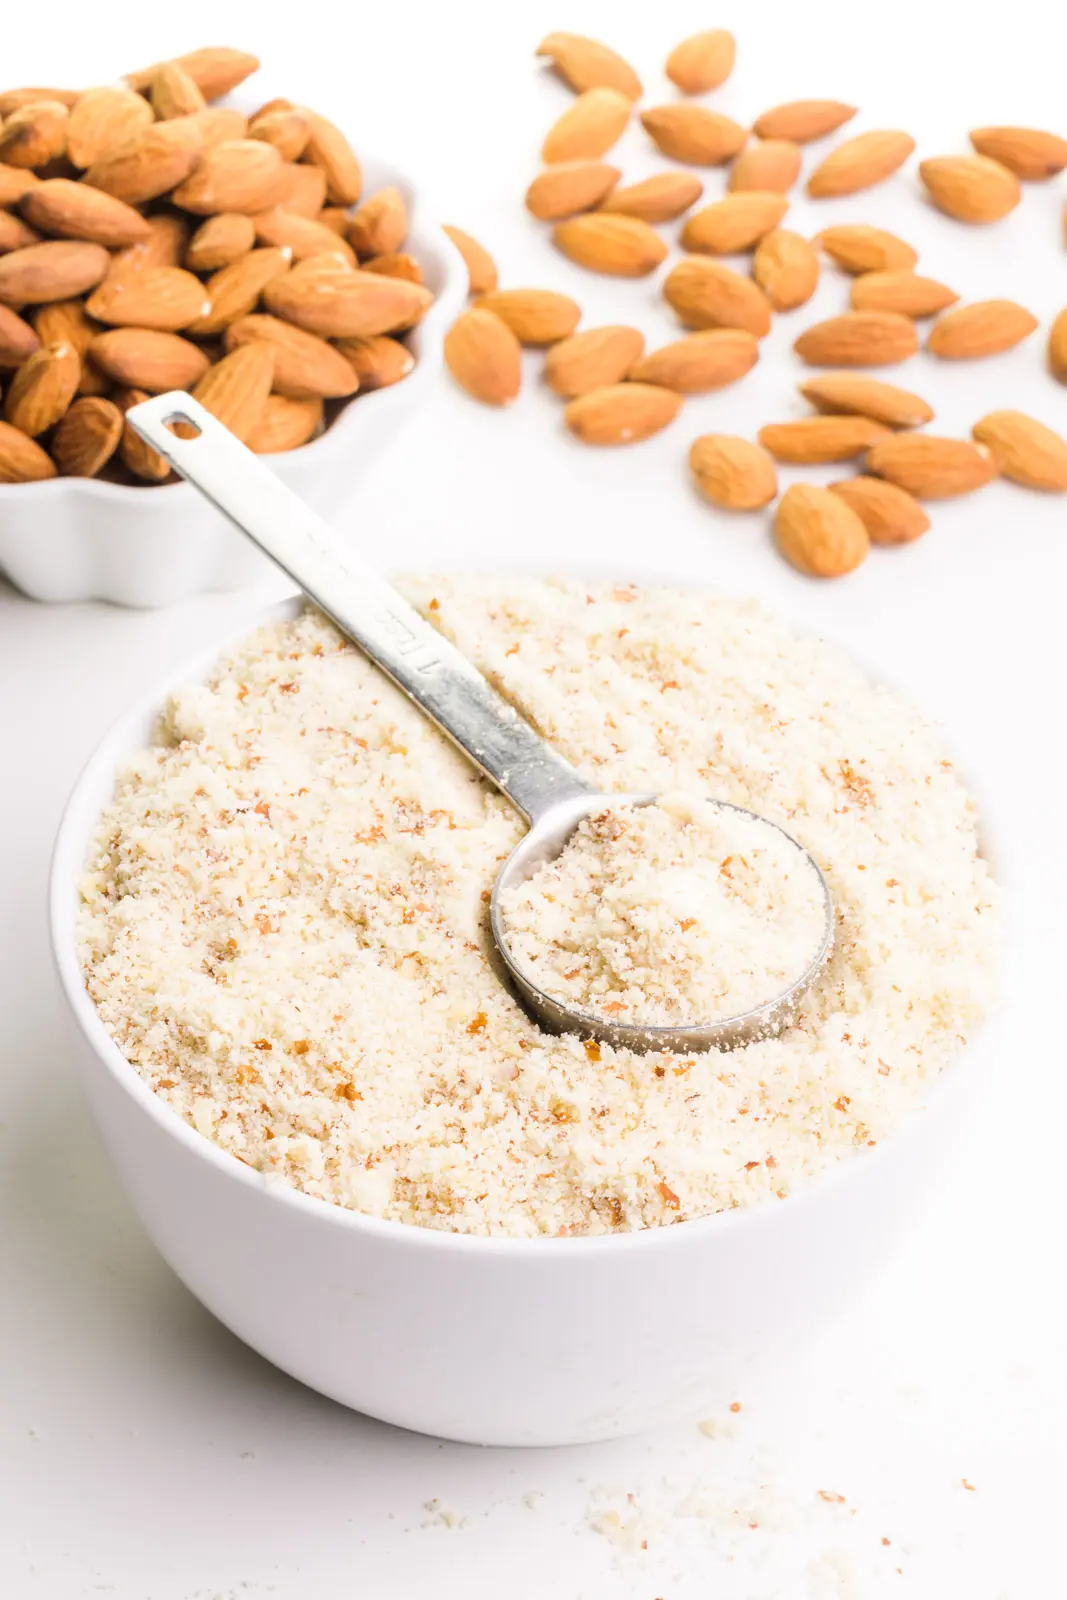 A metal measuring spoon sits in a bowl full of almond meal flour. There's a bowl of almonds in the background with more almonds on the table beside it.